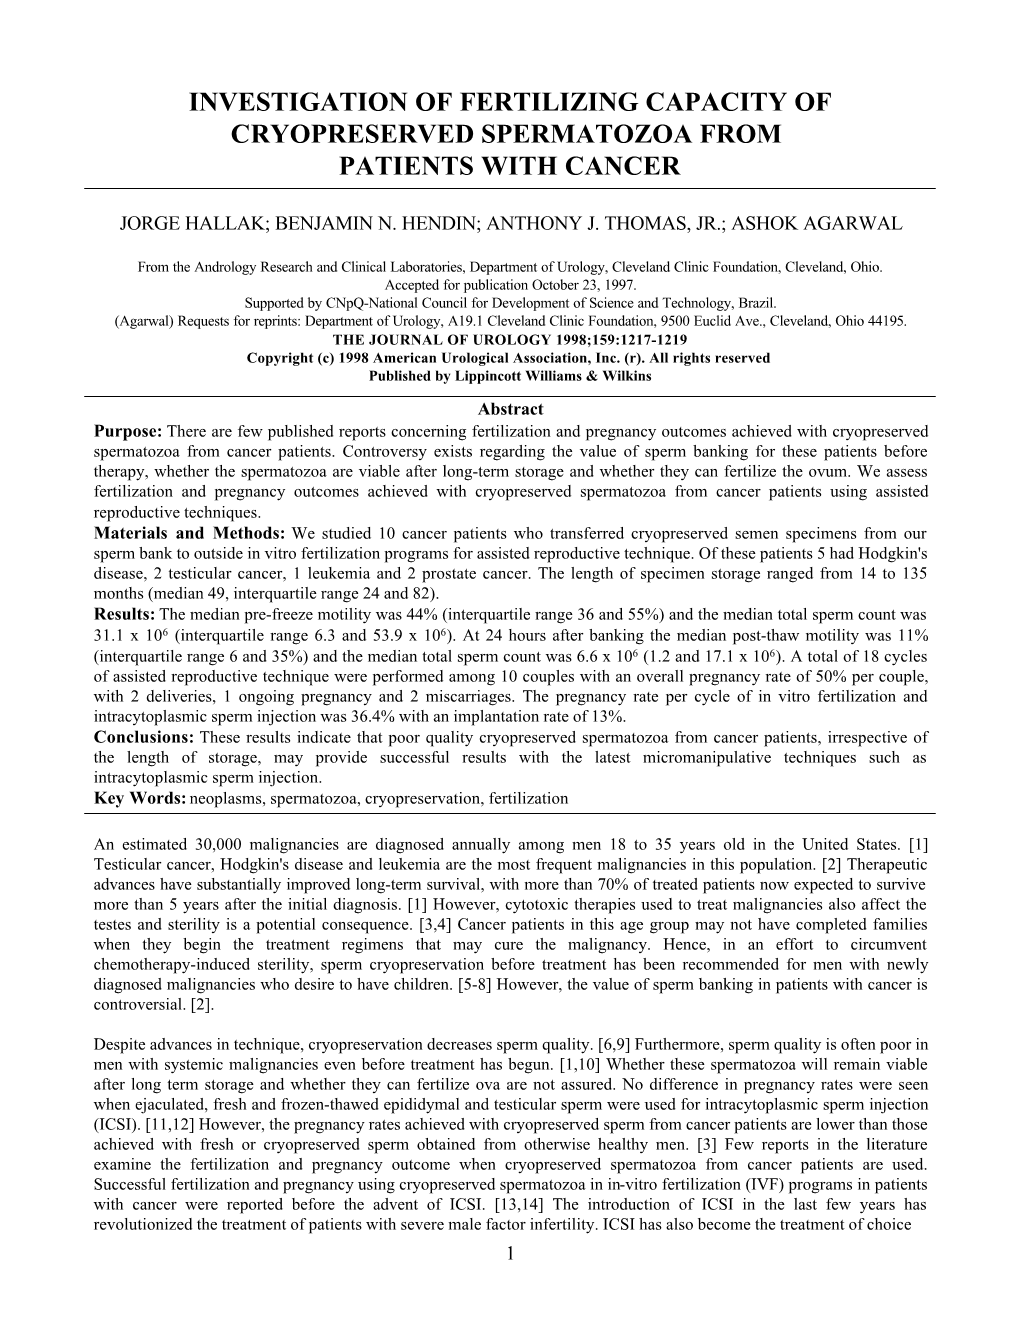 Investigation of Fertilizing Capacity of Cryopreserved Spermatozoa from Patients with Cancer